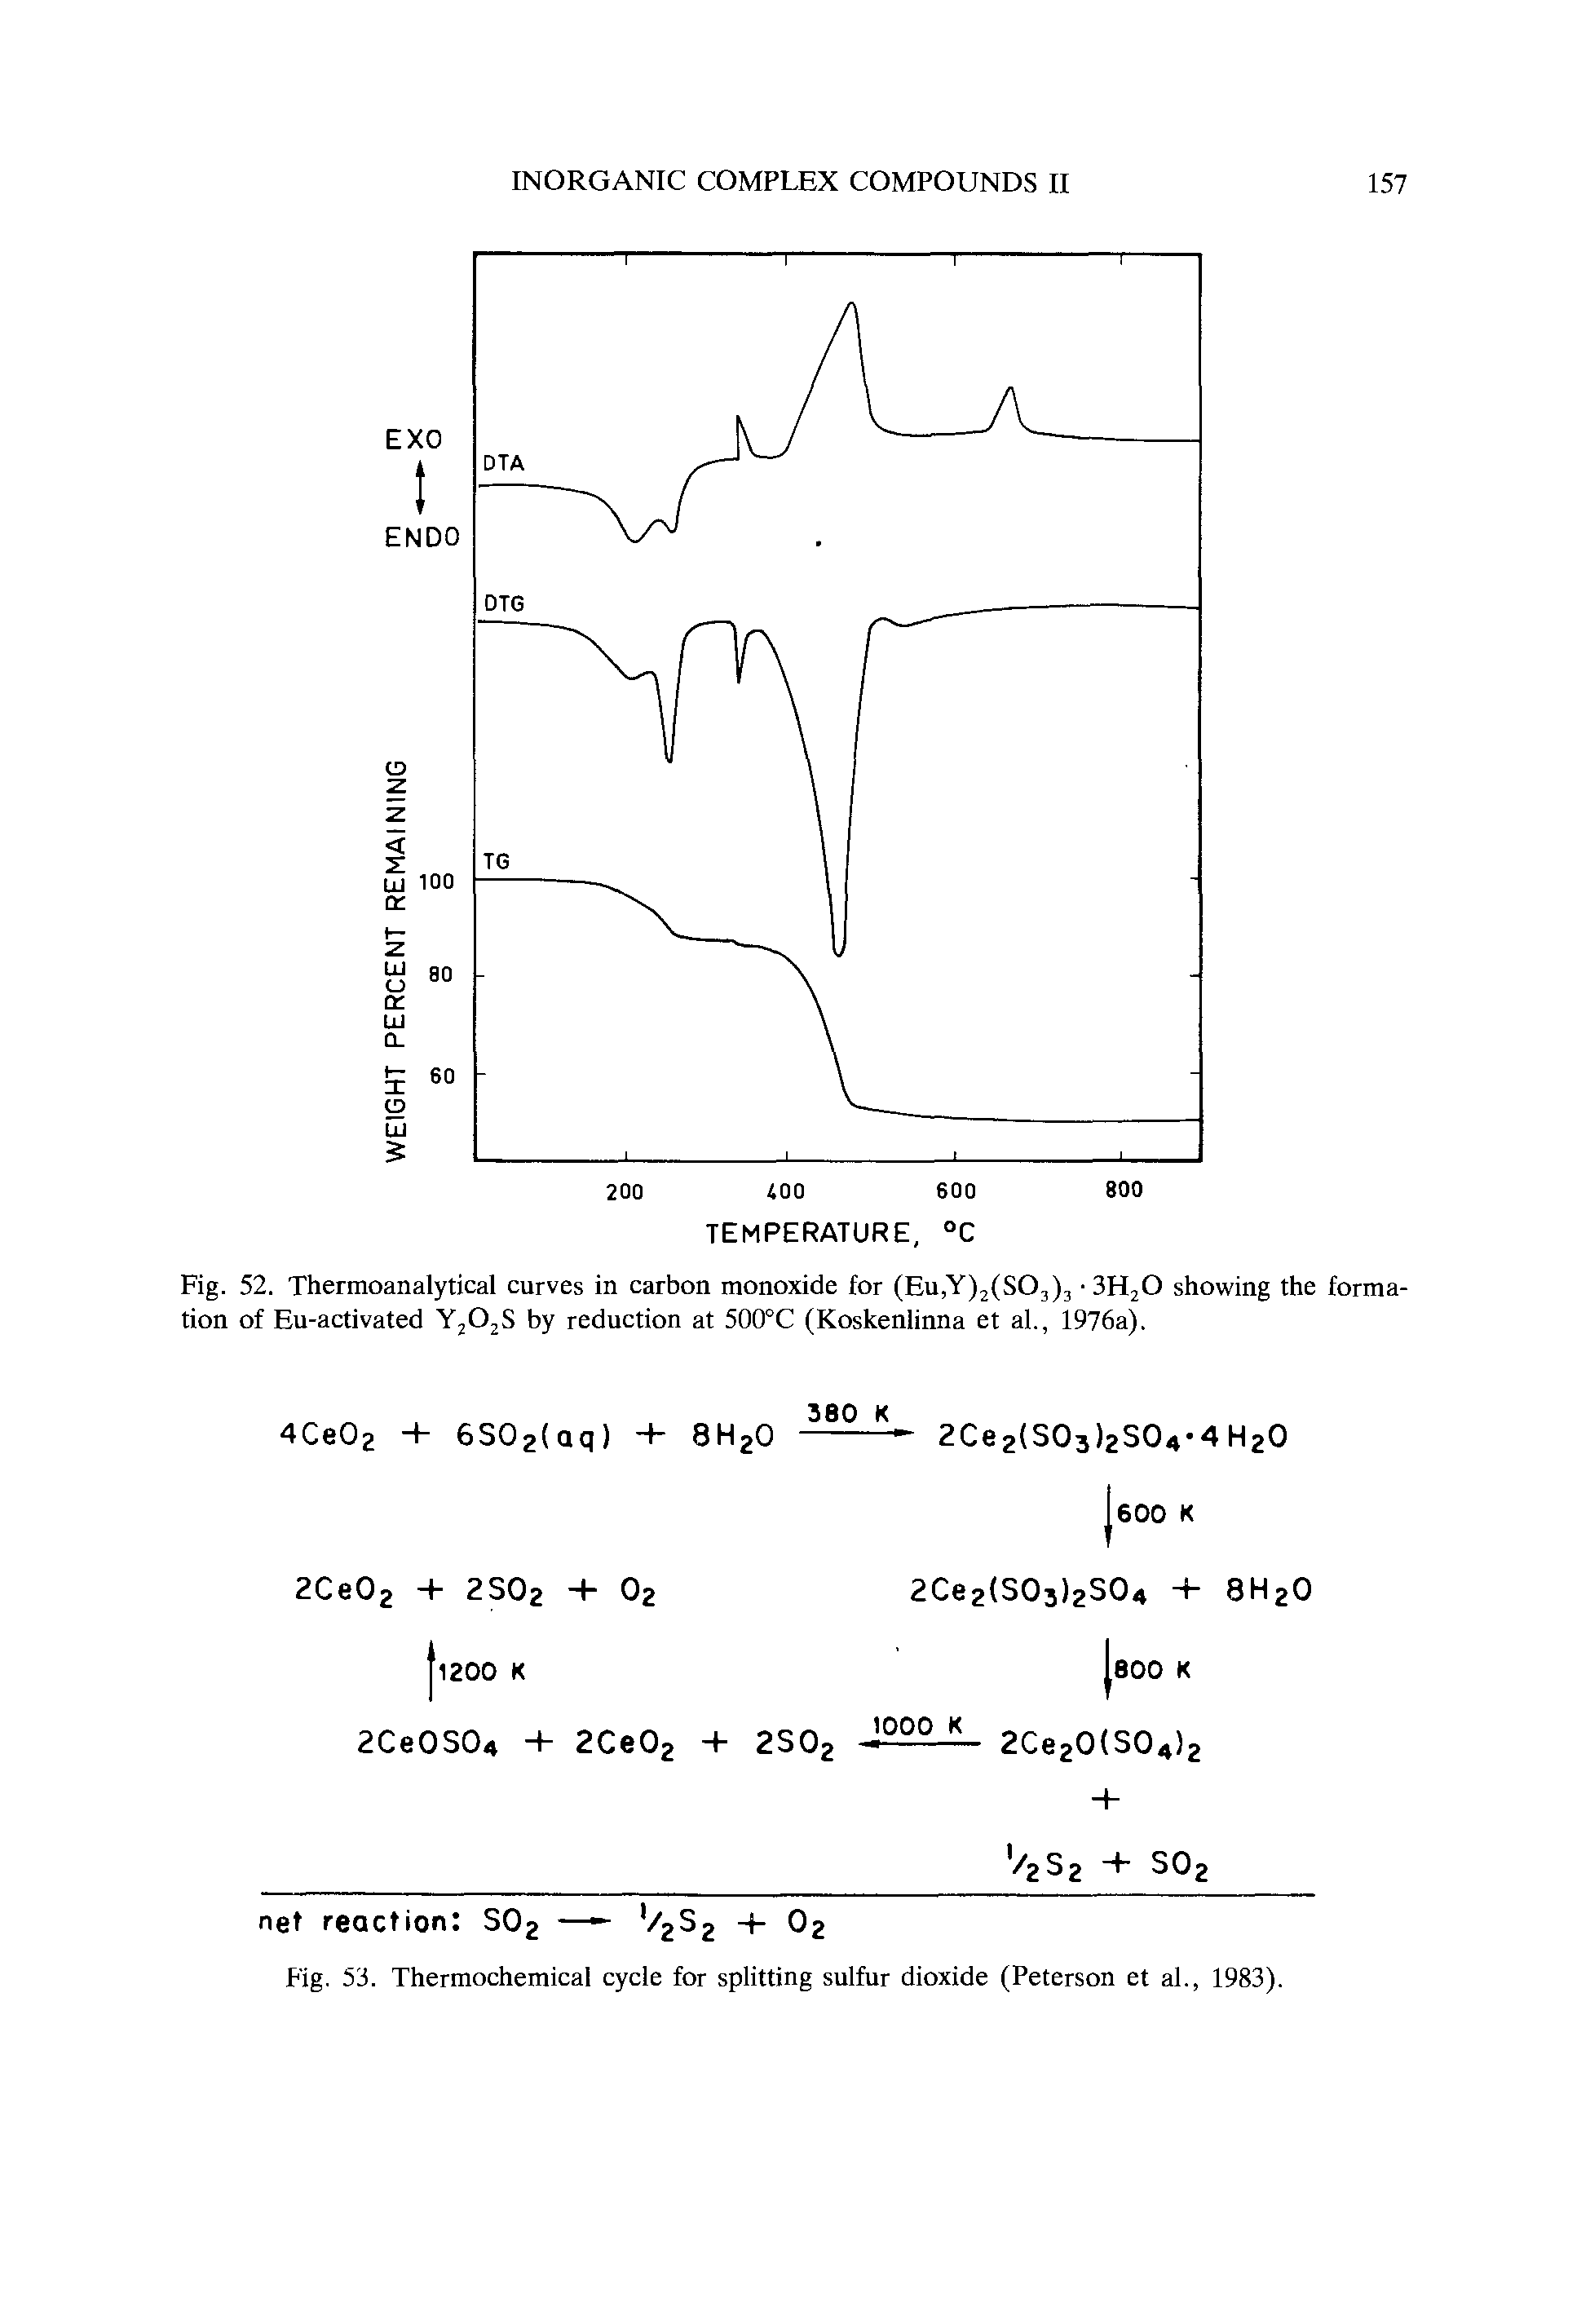 Fig. 52. Thermoanalytical curves in carbon monoxide for (Eu,Y)2(S03)j SHjO showing the formation of Eu-activated Y O S by reduction at 500°C (Koskenlinna et al., 1976a).